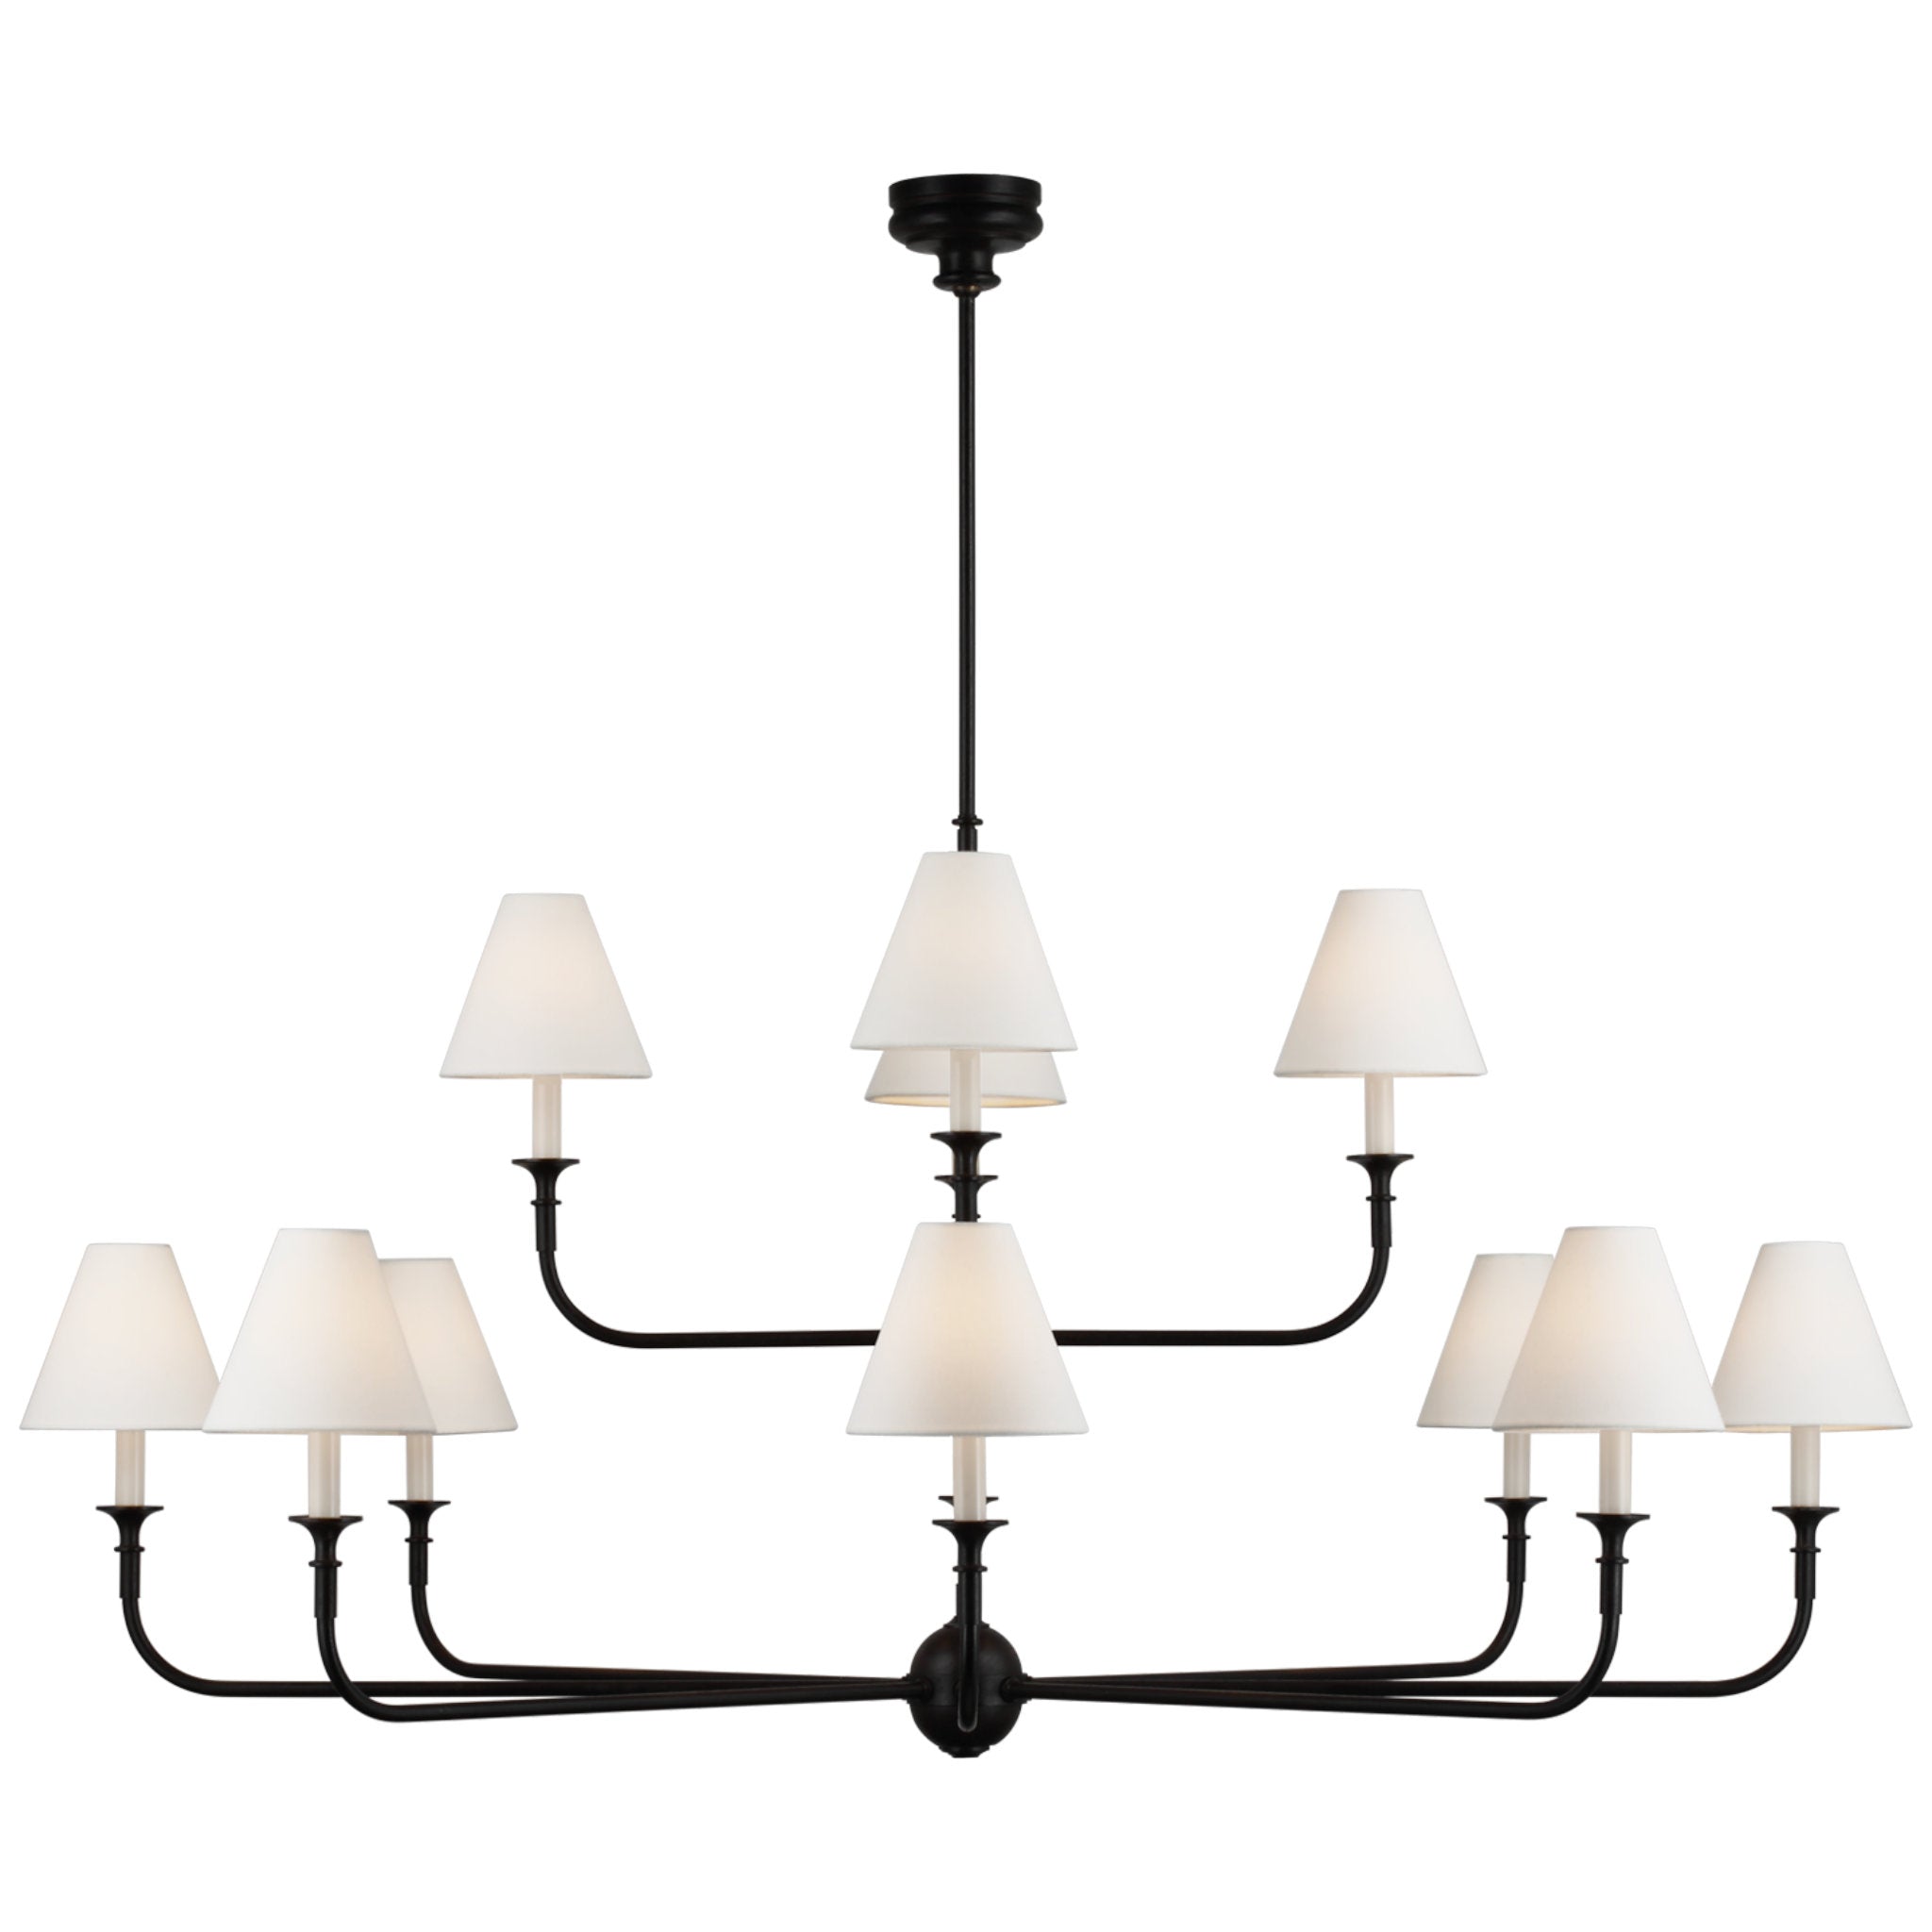 Thomas O'Brien Piaf Grande Two-Tier Chandelier in Aged Iron and Ebonized Oak with Linen Shades